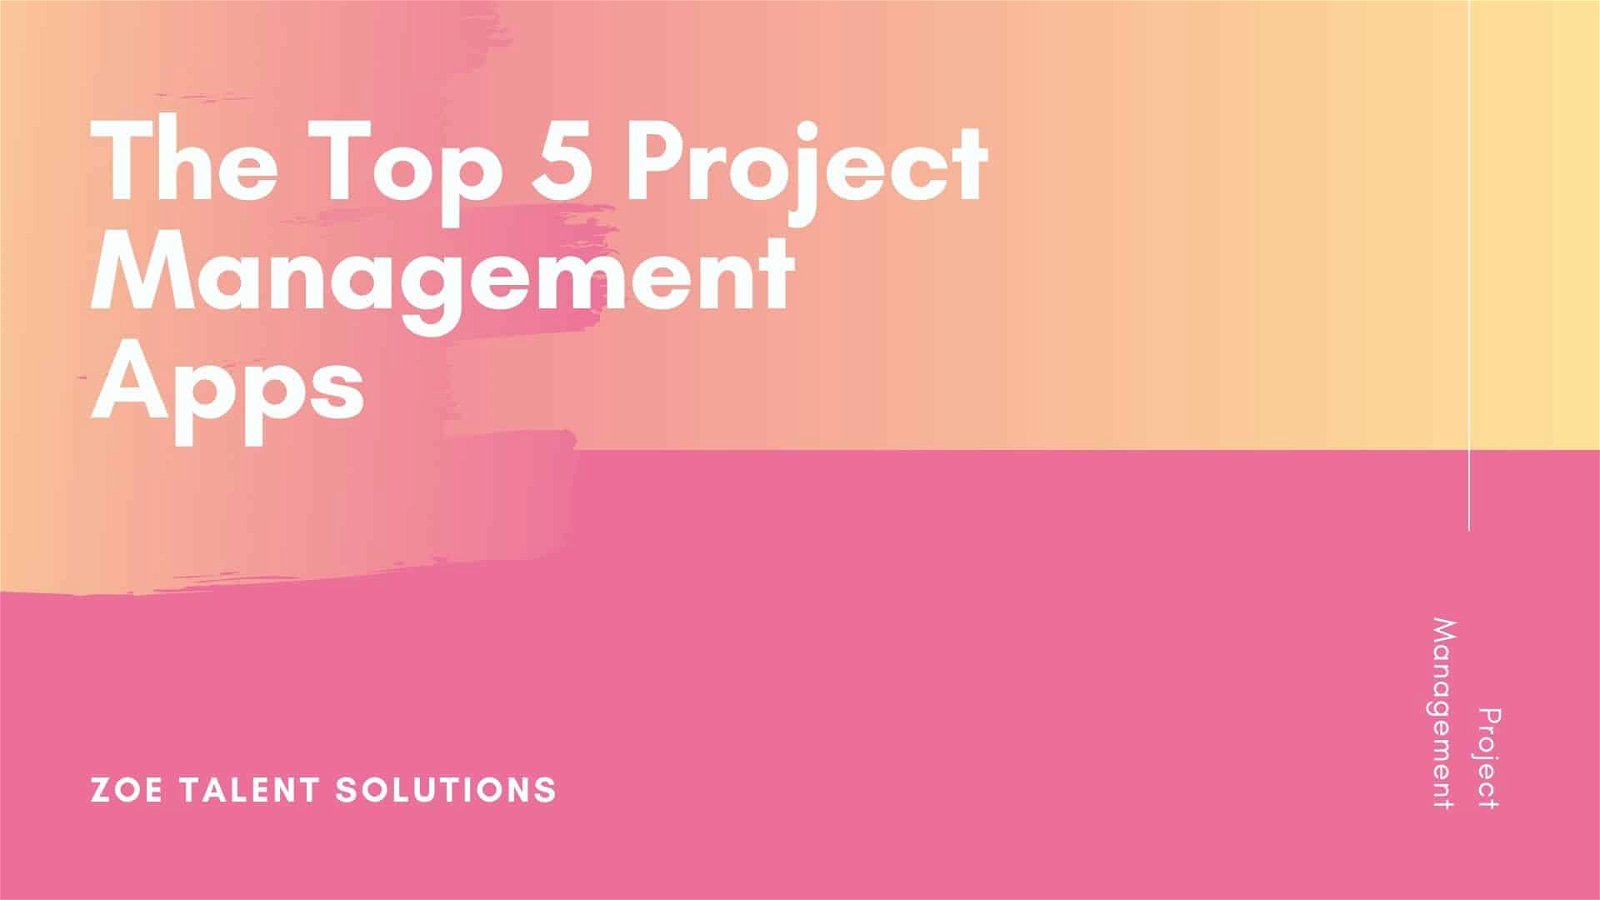 The Top 5 Project Management Apps - Zoe Talent Solutions